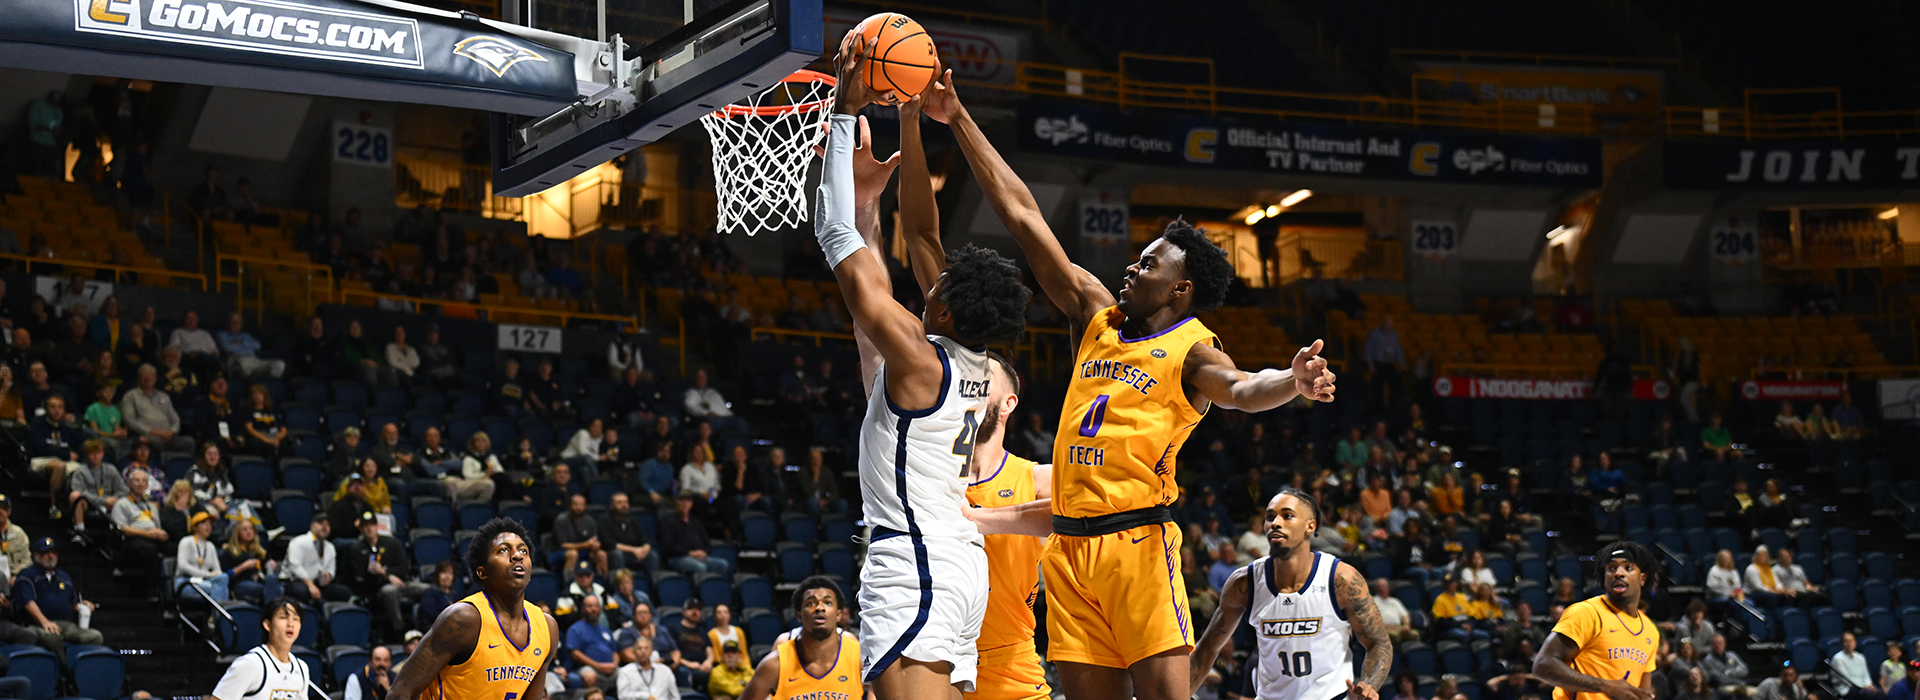 Mocs edge Golden Eagles in close-fought battle in Chattanooga